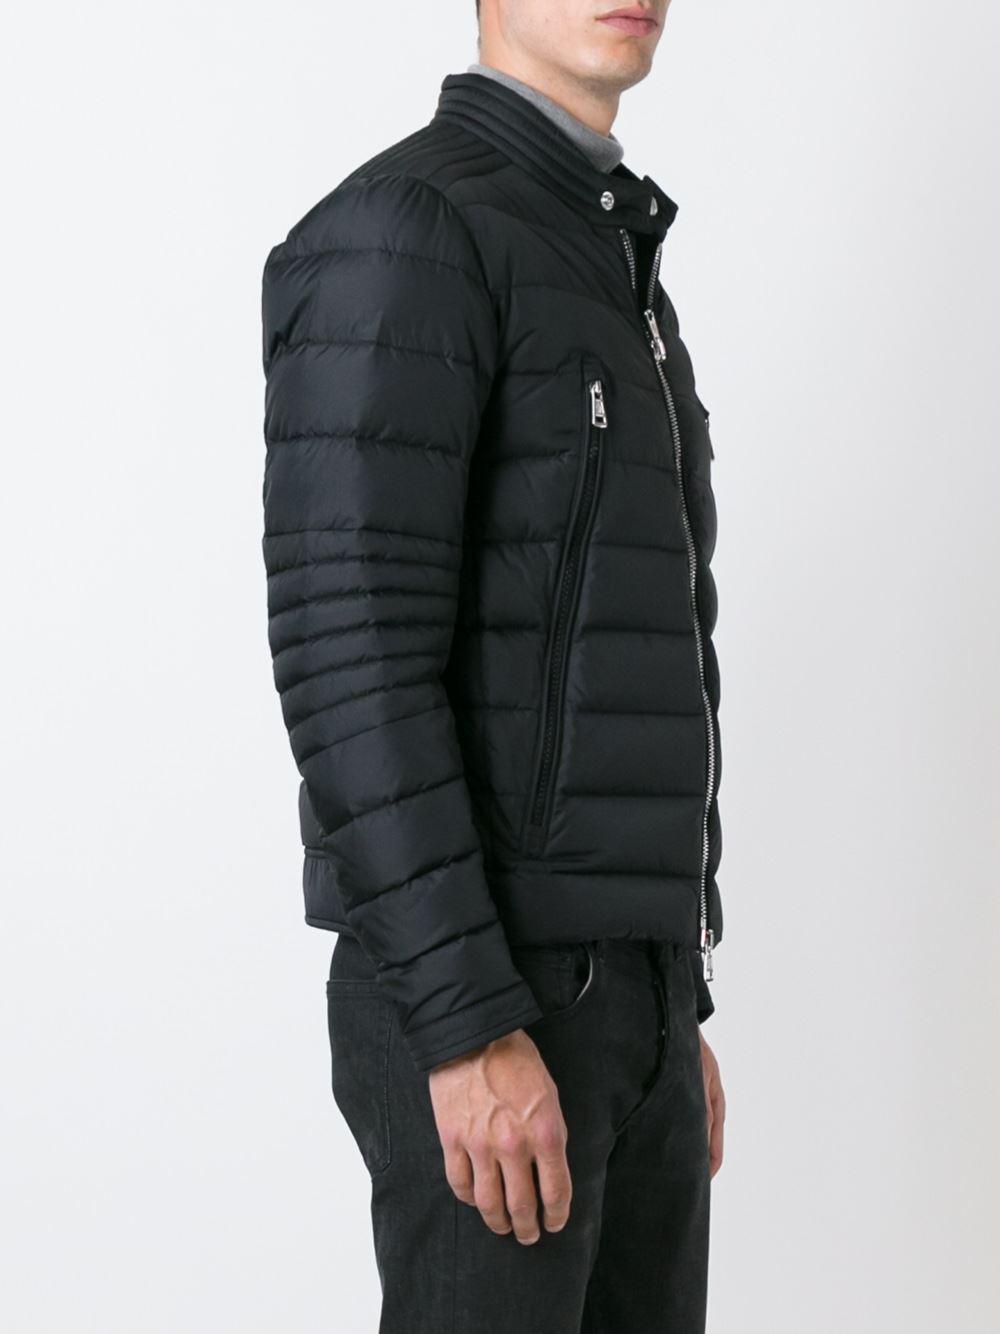 Moncler Amiot Down-flled Quilted Jacket in Black for Men - Lyst